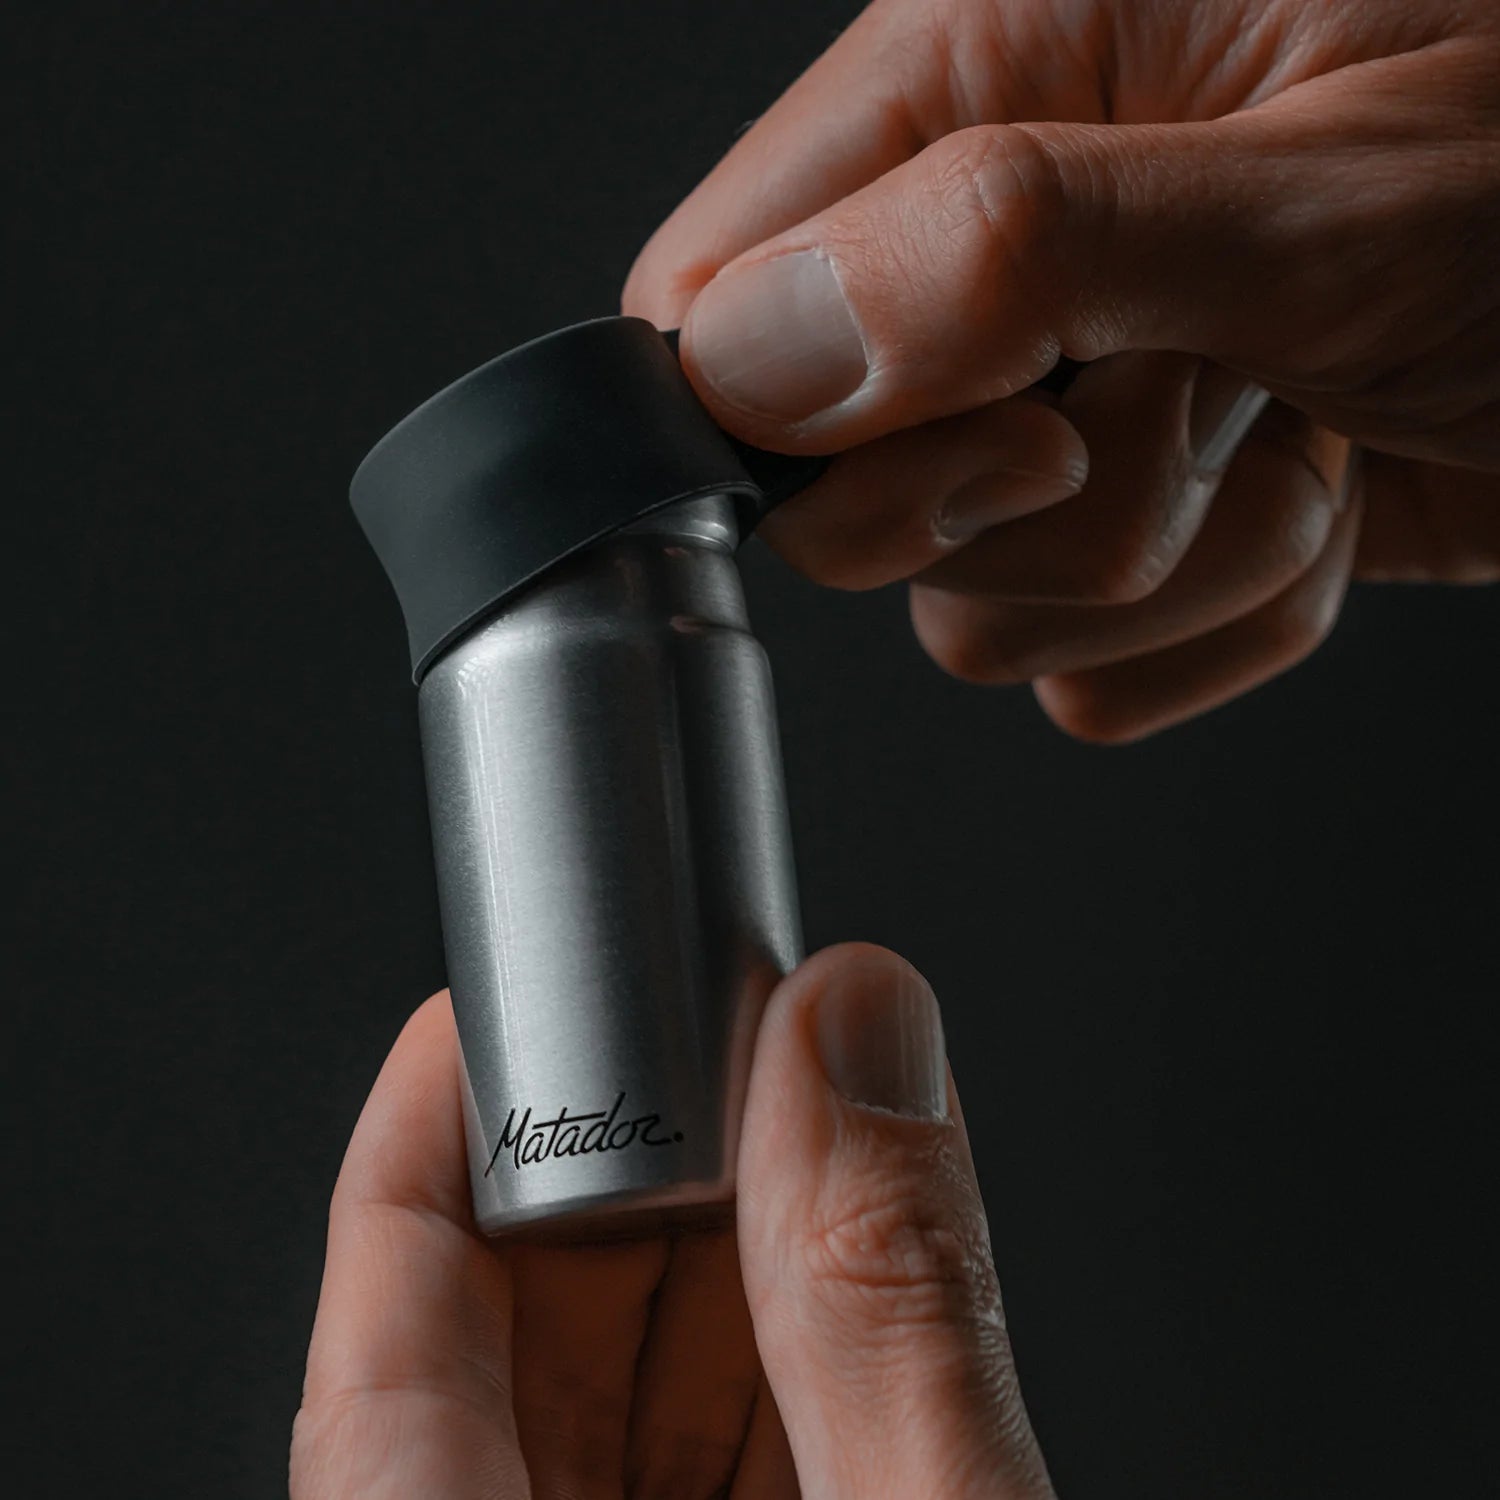 Waterproof Travel Canister 40ml